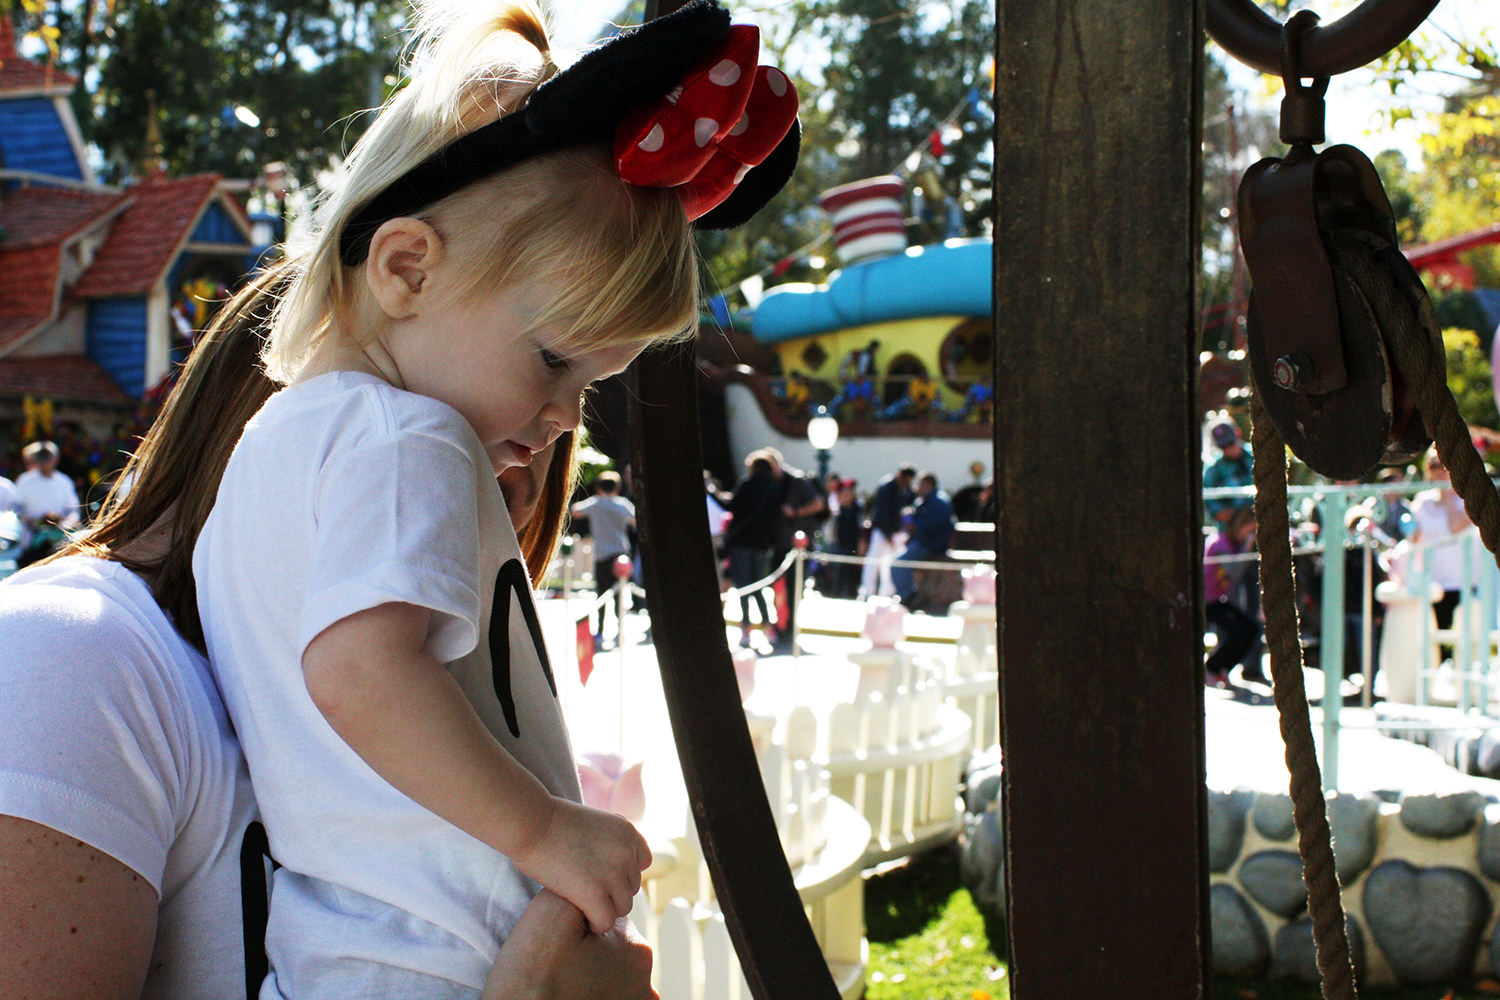 Visiting Disneyland with a Toddler? These tips from lifestyle blogger Carly of Lipgloss & Crayons will make your visit magical, fun and easy as pie!